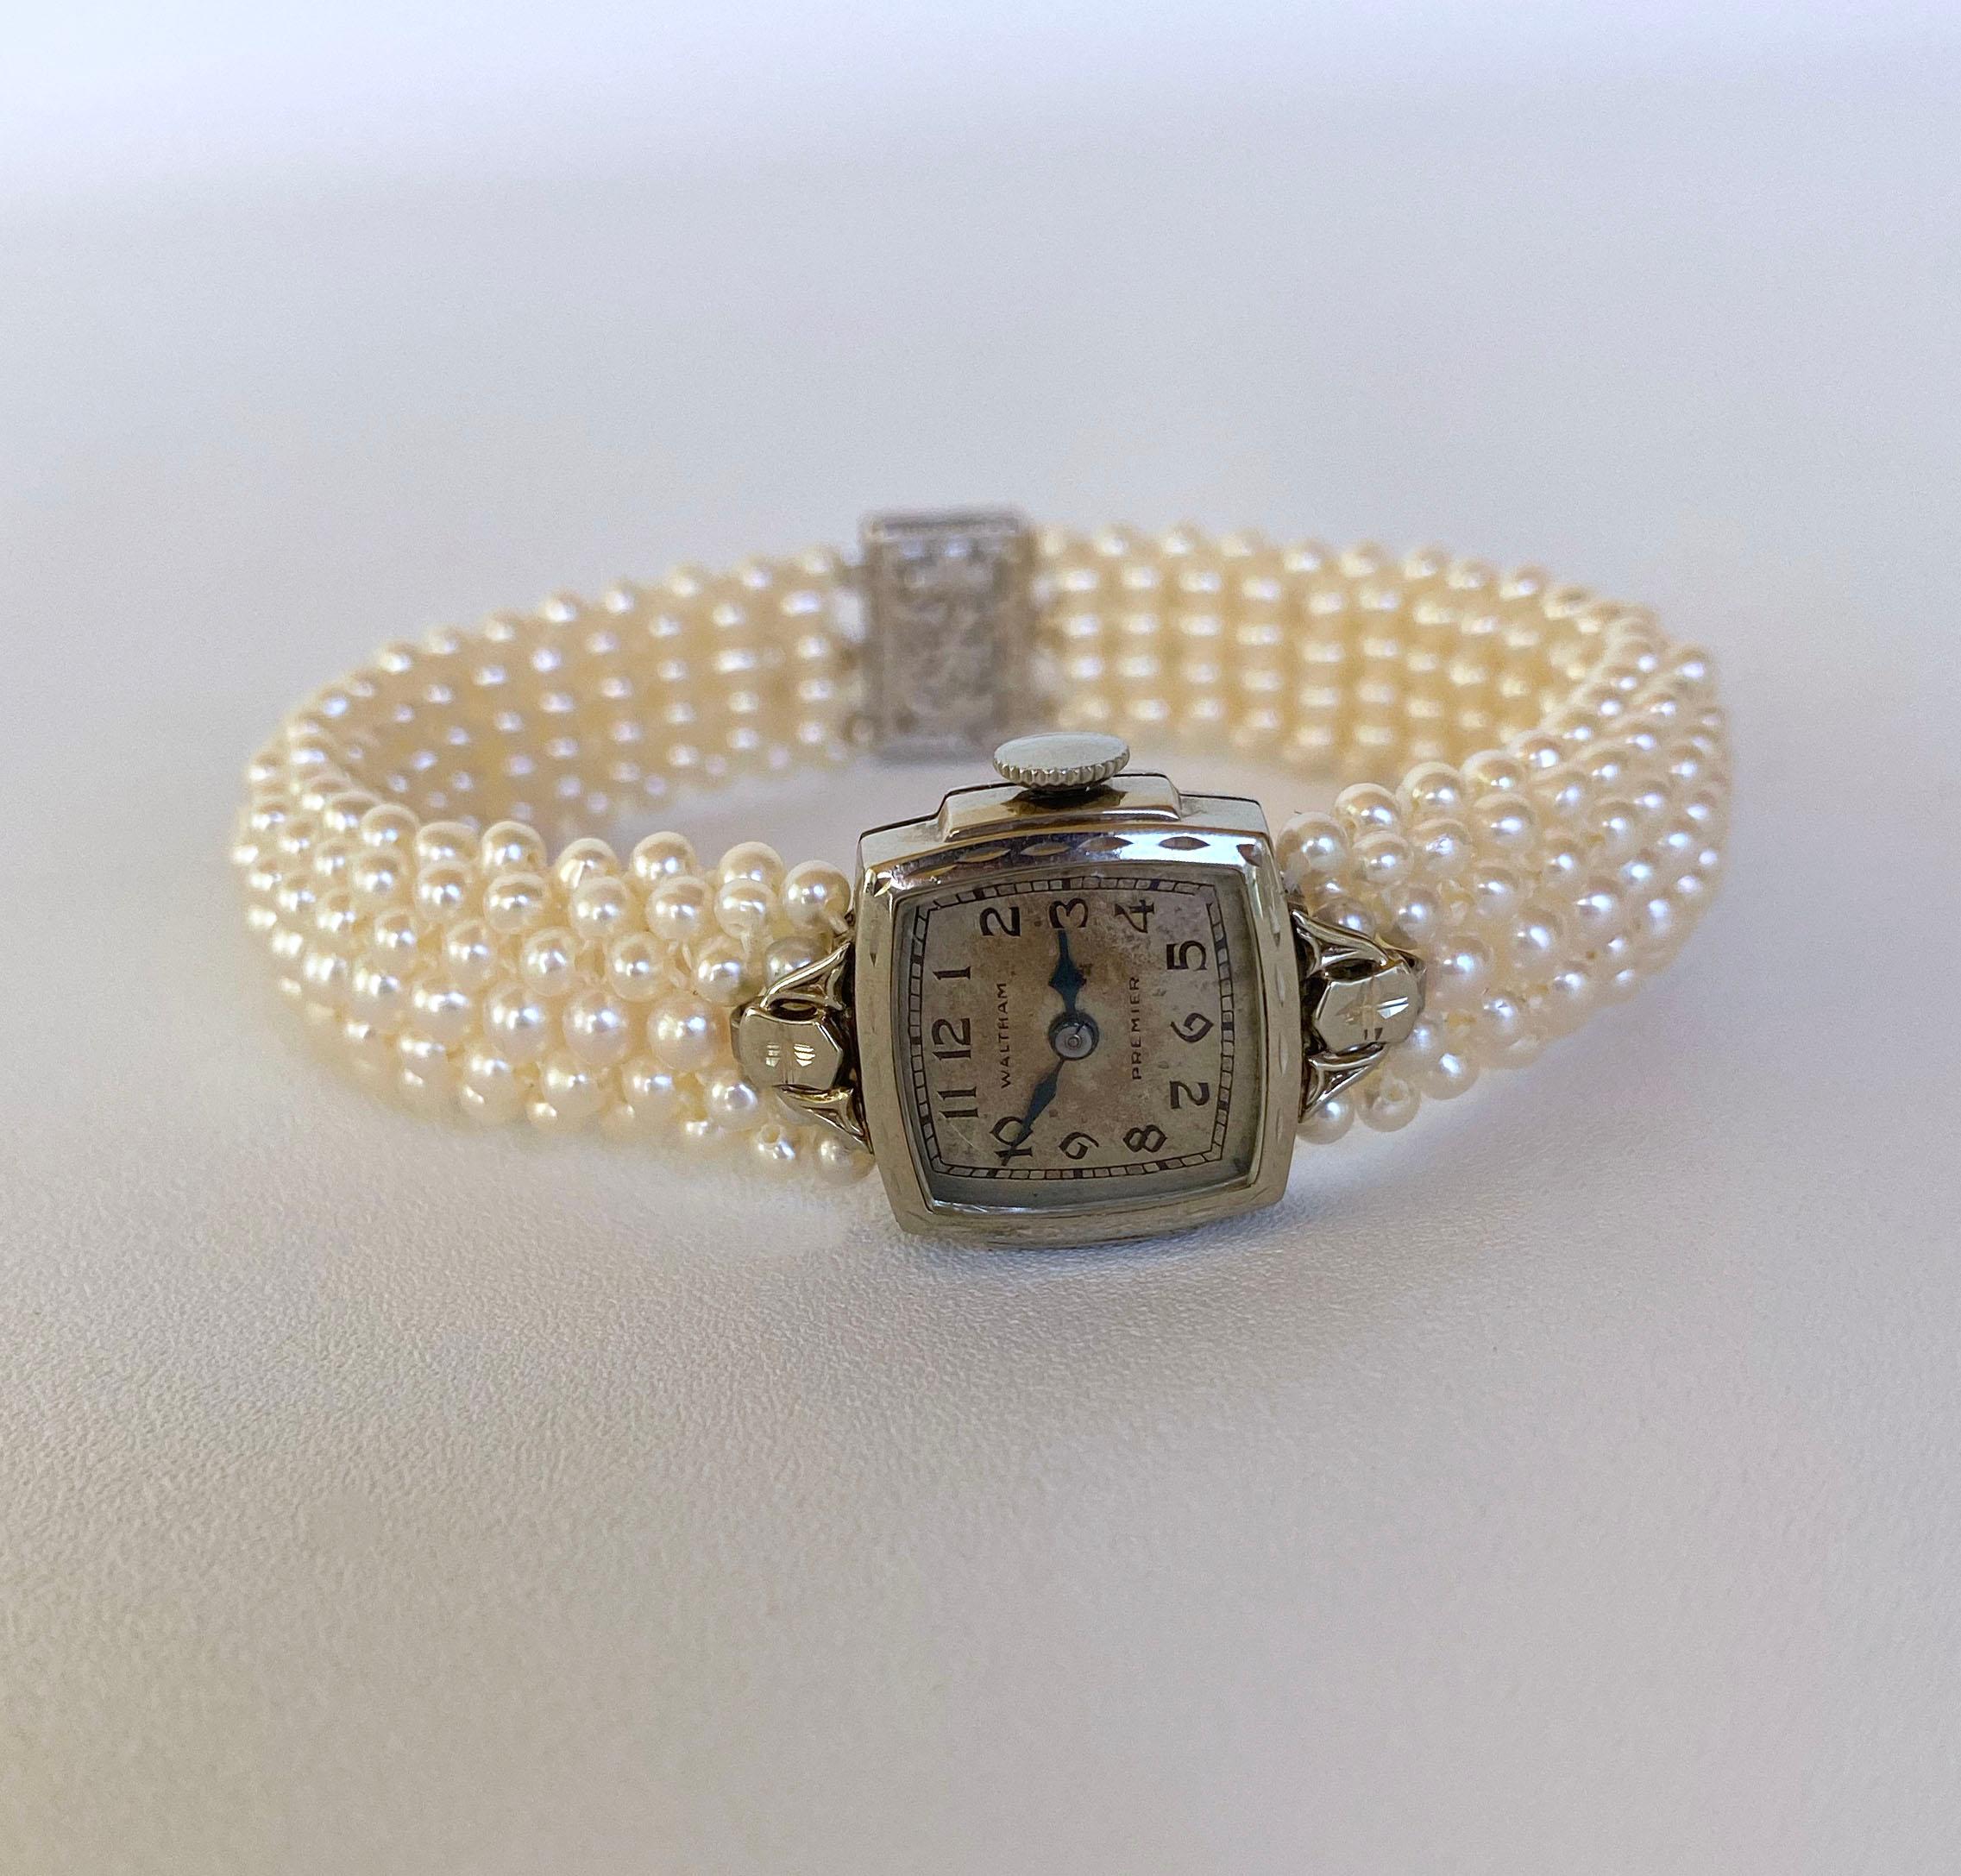 Gorgeous piece hand made by Marina J. in Los Angeles. This amazing bracelet features a 3 dimensional lace like woven design. As shown in photos, the bottom of this piece has been woven flat, allowing it to lay perfectly and comfortably around the